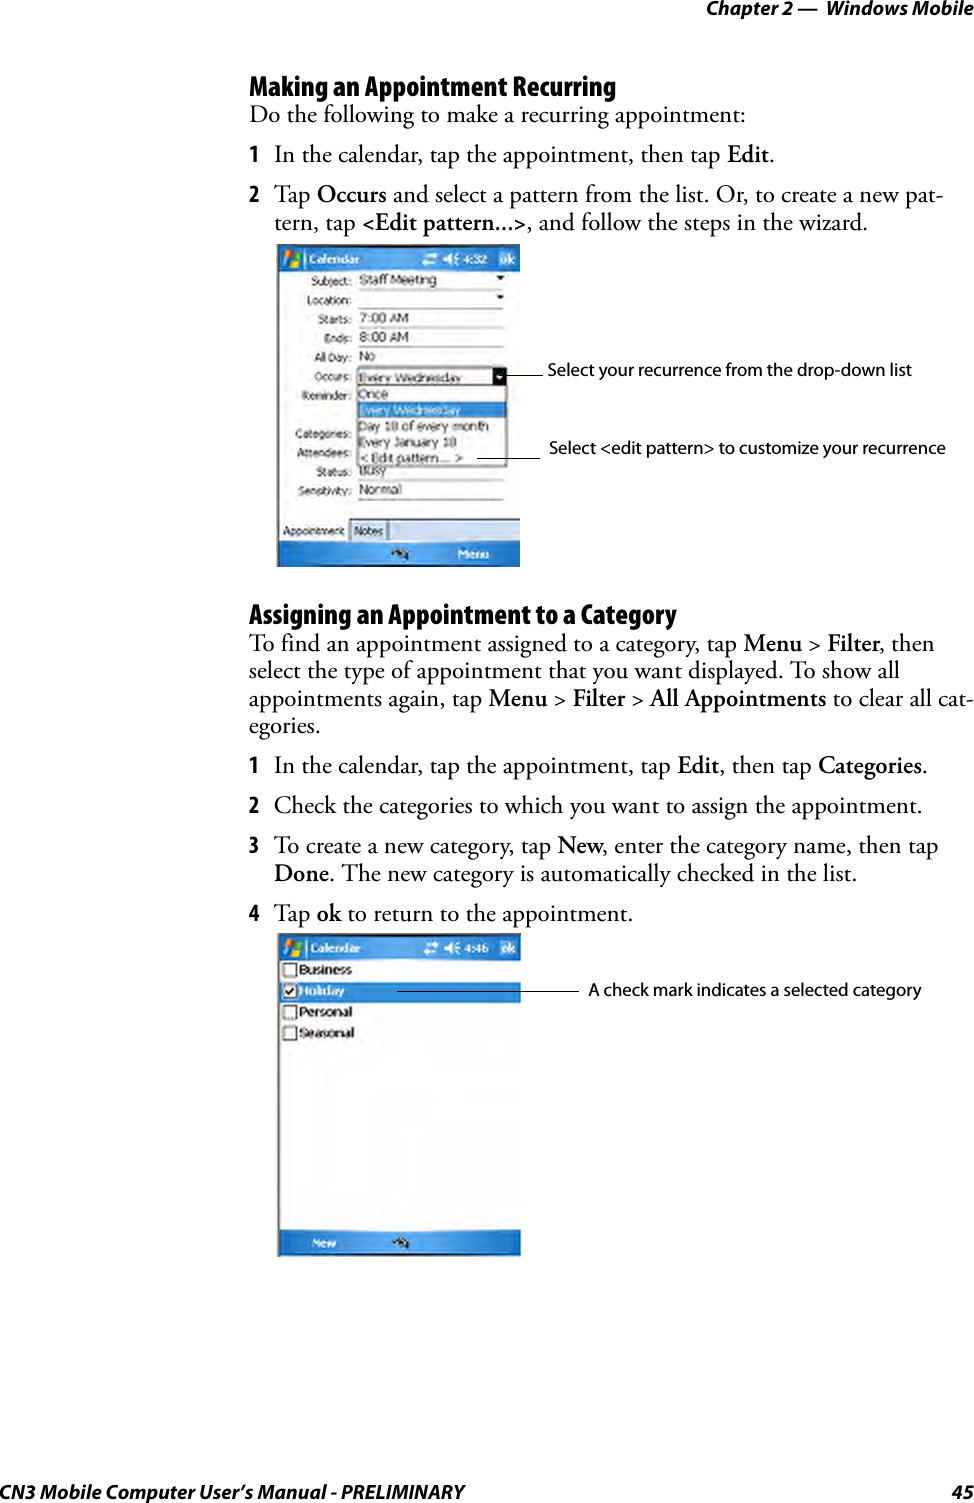 Chapter 2 —  Windows MobileCN3 Mobile Computer User’s Manual - PRELIMINARY 45Making an Appointment RecurringDo the following to make a recurring appointment:1In the calendar, tap the appointment, then tap Edit.2Tap Occurs and select a pattern from the list. Or, to create a new pat-tern, tap &lt;Edit pattern...&gt;, and follow the steps in the wizard.Assigning an Appointment to a CategoryTo find an appointment assigned to a category, tap Menu &gt; Filter, then select the type of appointment that you want displayed. To show all appointments again, tap Menu &gt; Filter &gt; All Appointments to clear all cat-egories.1In the calendar, tap the appointment, tap Edit, then tap Categories.2Check the categories to which you want to assign the appointment.3To create a new category, tap New, enter the category name, then tap Done. The new category is automatically checked in the list.4Tap ok to return to the appointment.Select your recurrence from the drop-down listSelect &lt;edit pattern&gt; to customize your recurrenceA check mark indicates a selected category